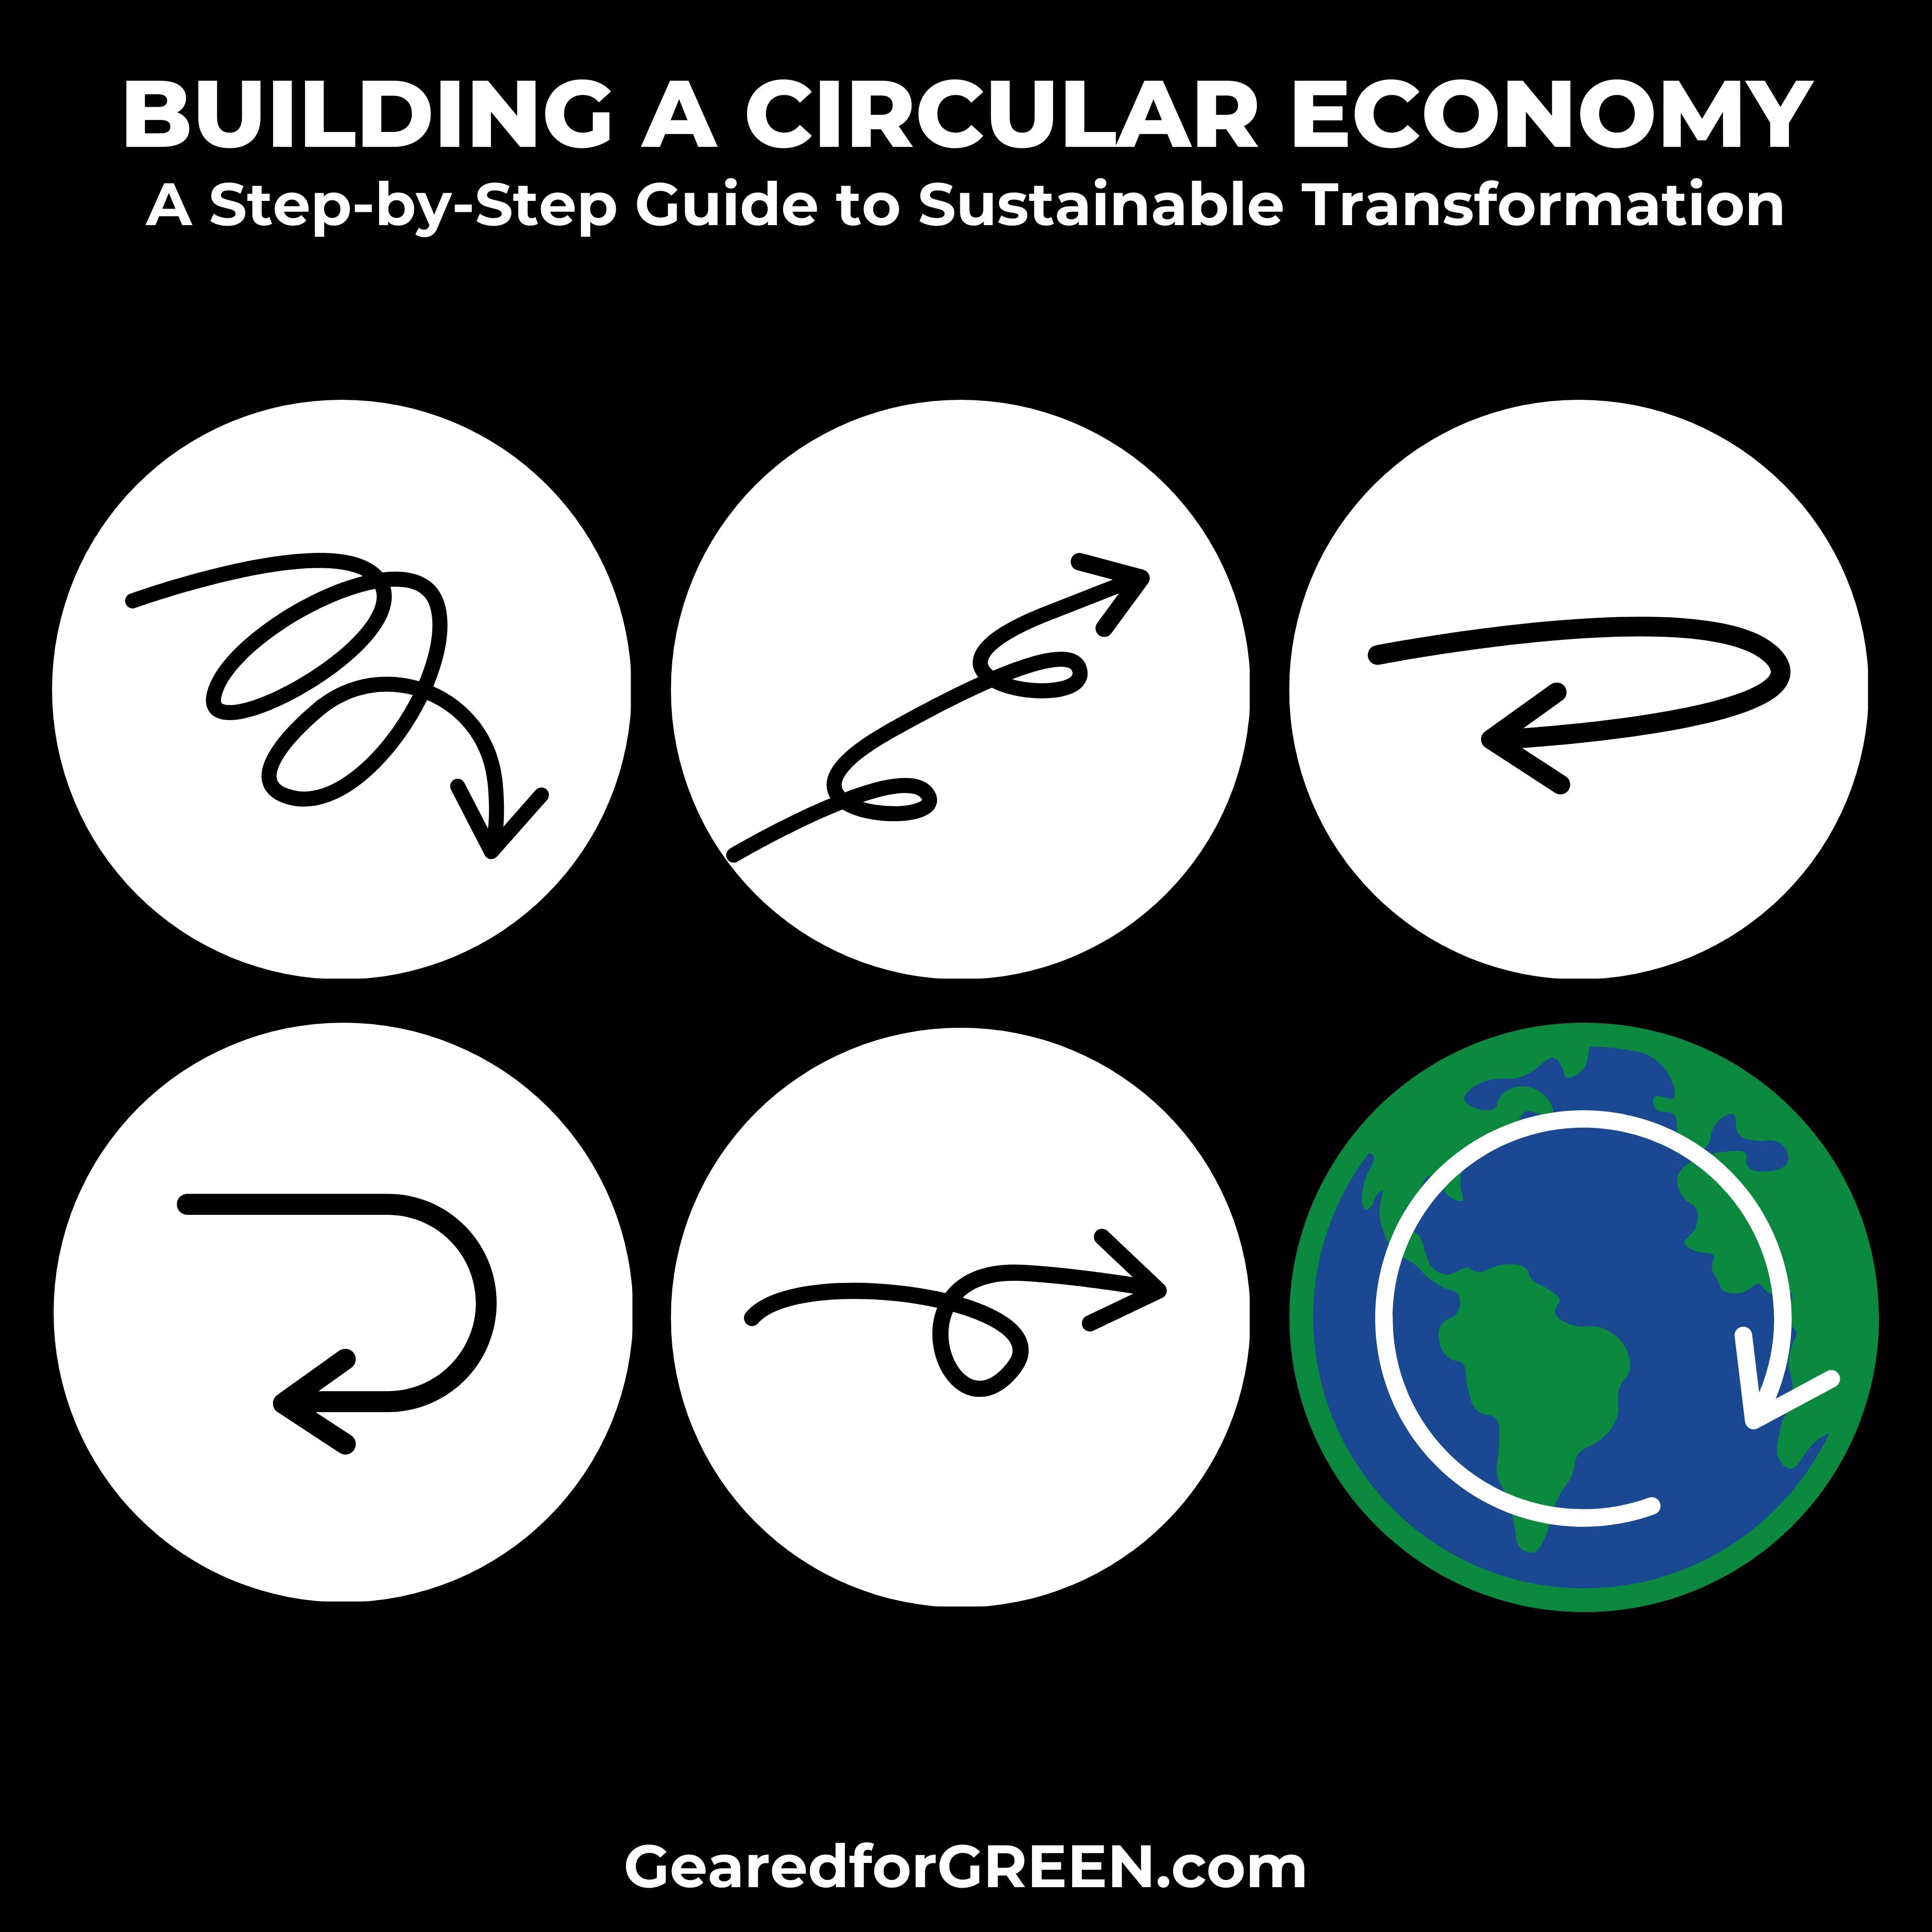 Building Circular Economies: A Step-by-Step Guide to Sustainable Transformation